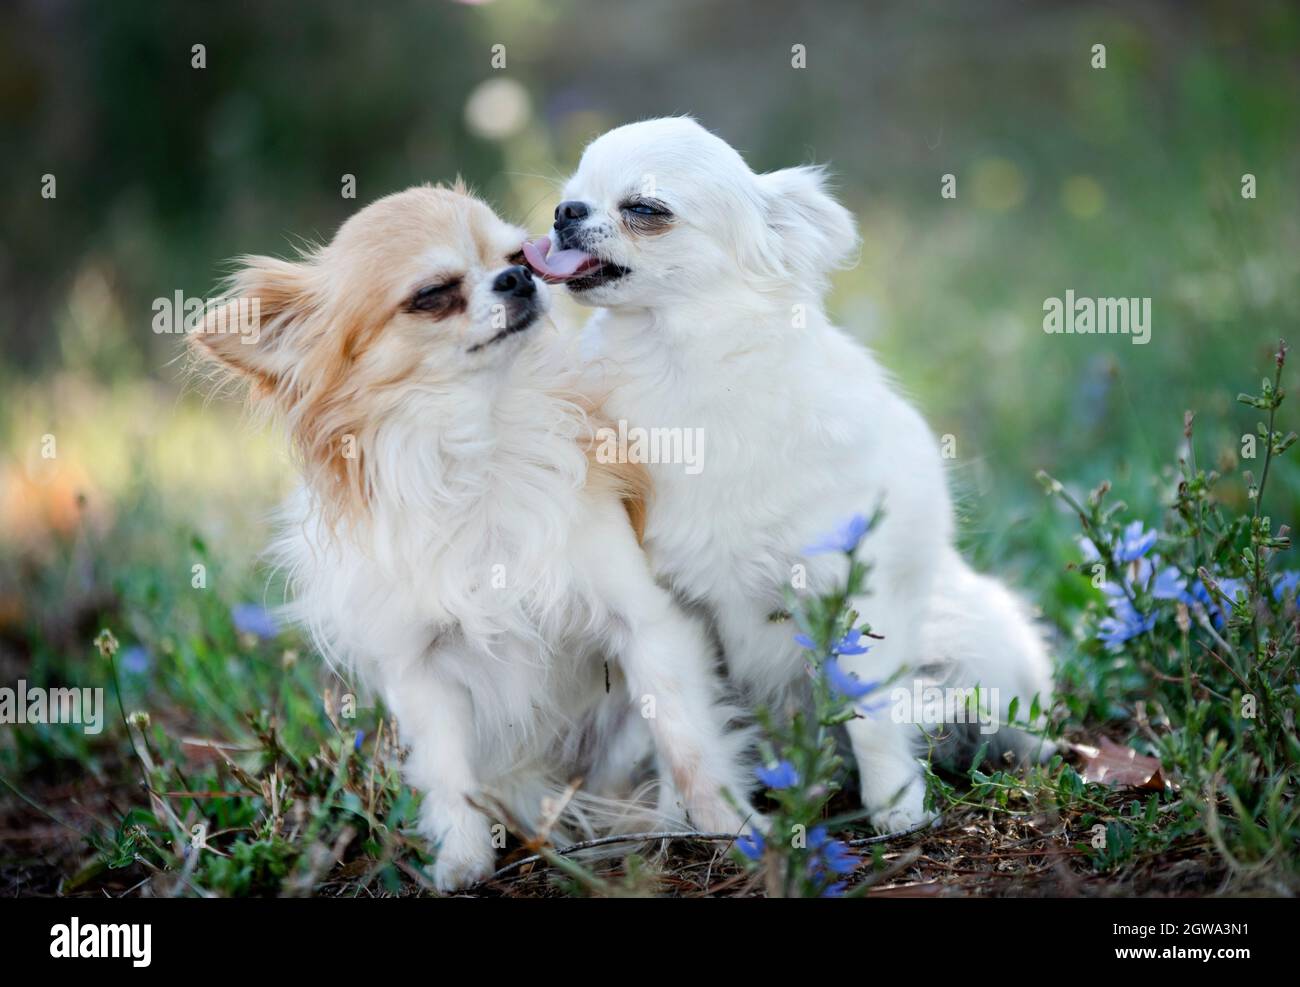 Close-up Of White Dogs On Plants Stock Photo